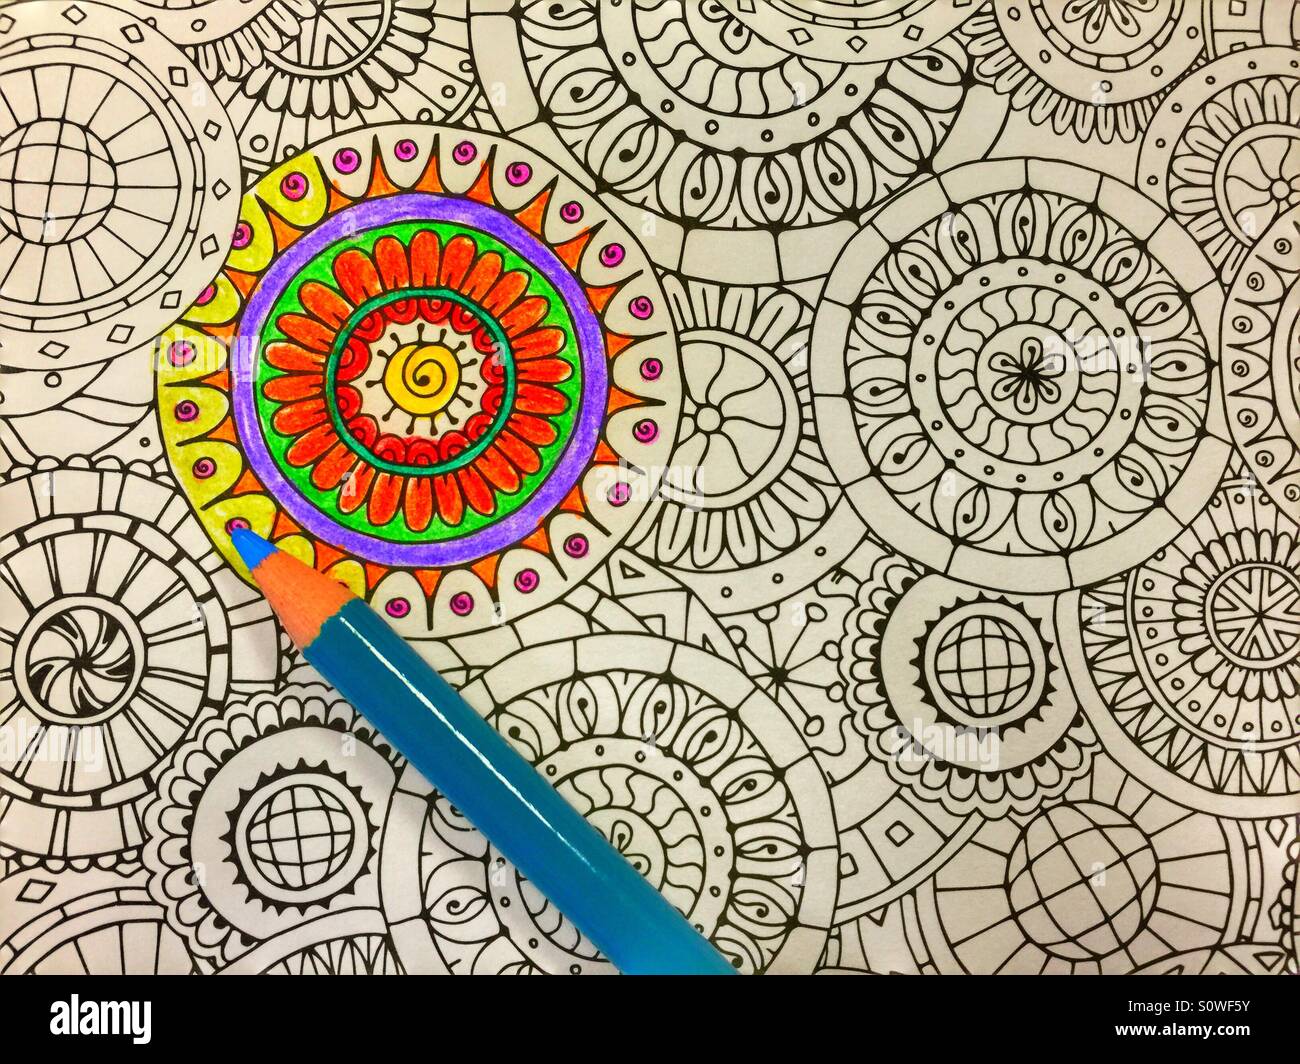 Adult Coloring Stock Photo